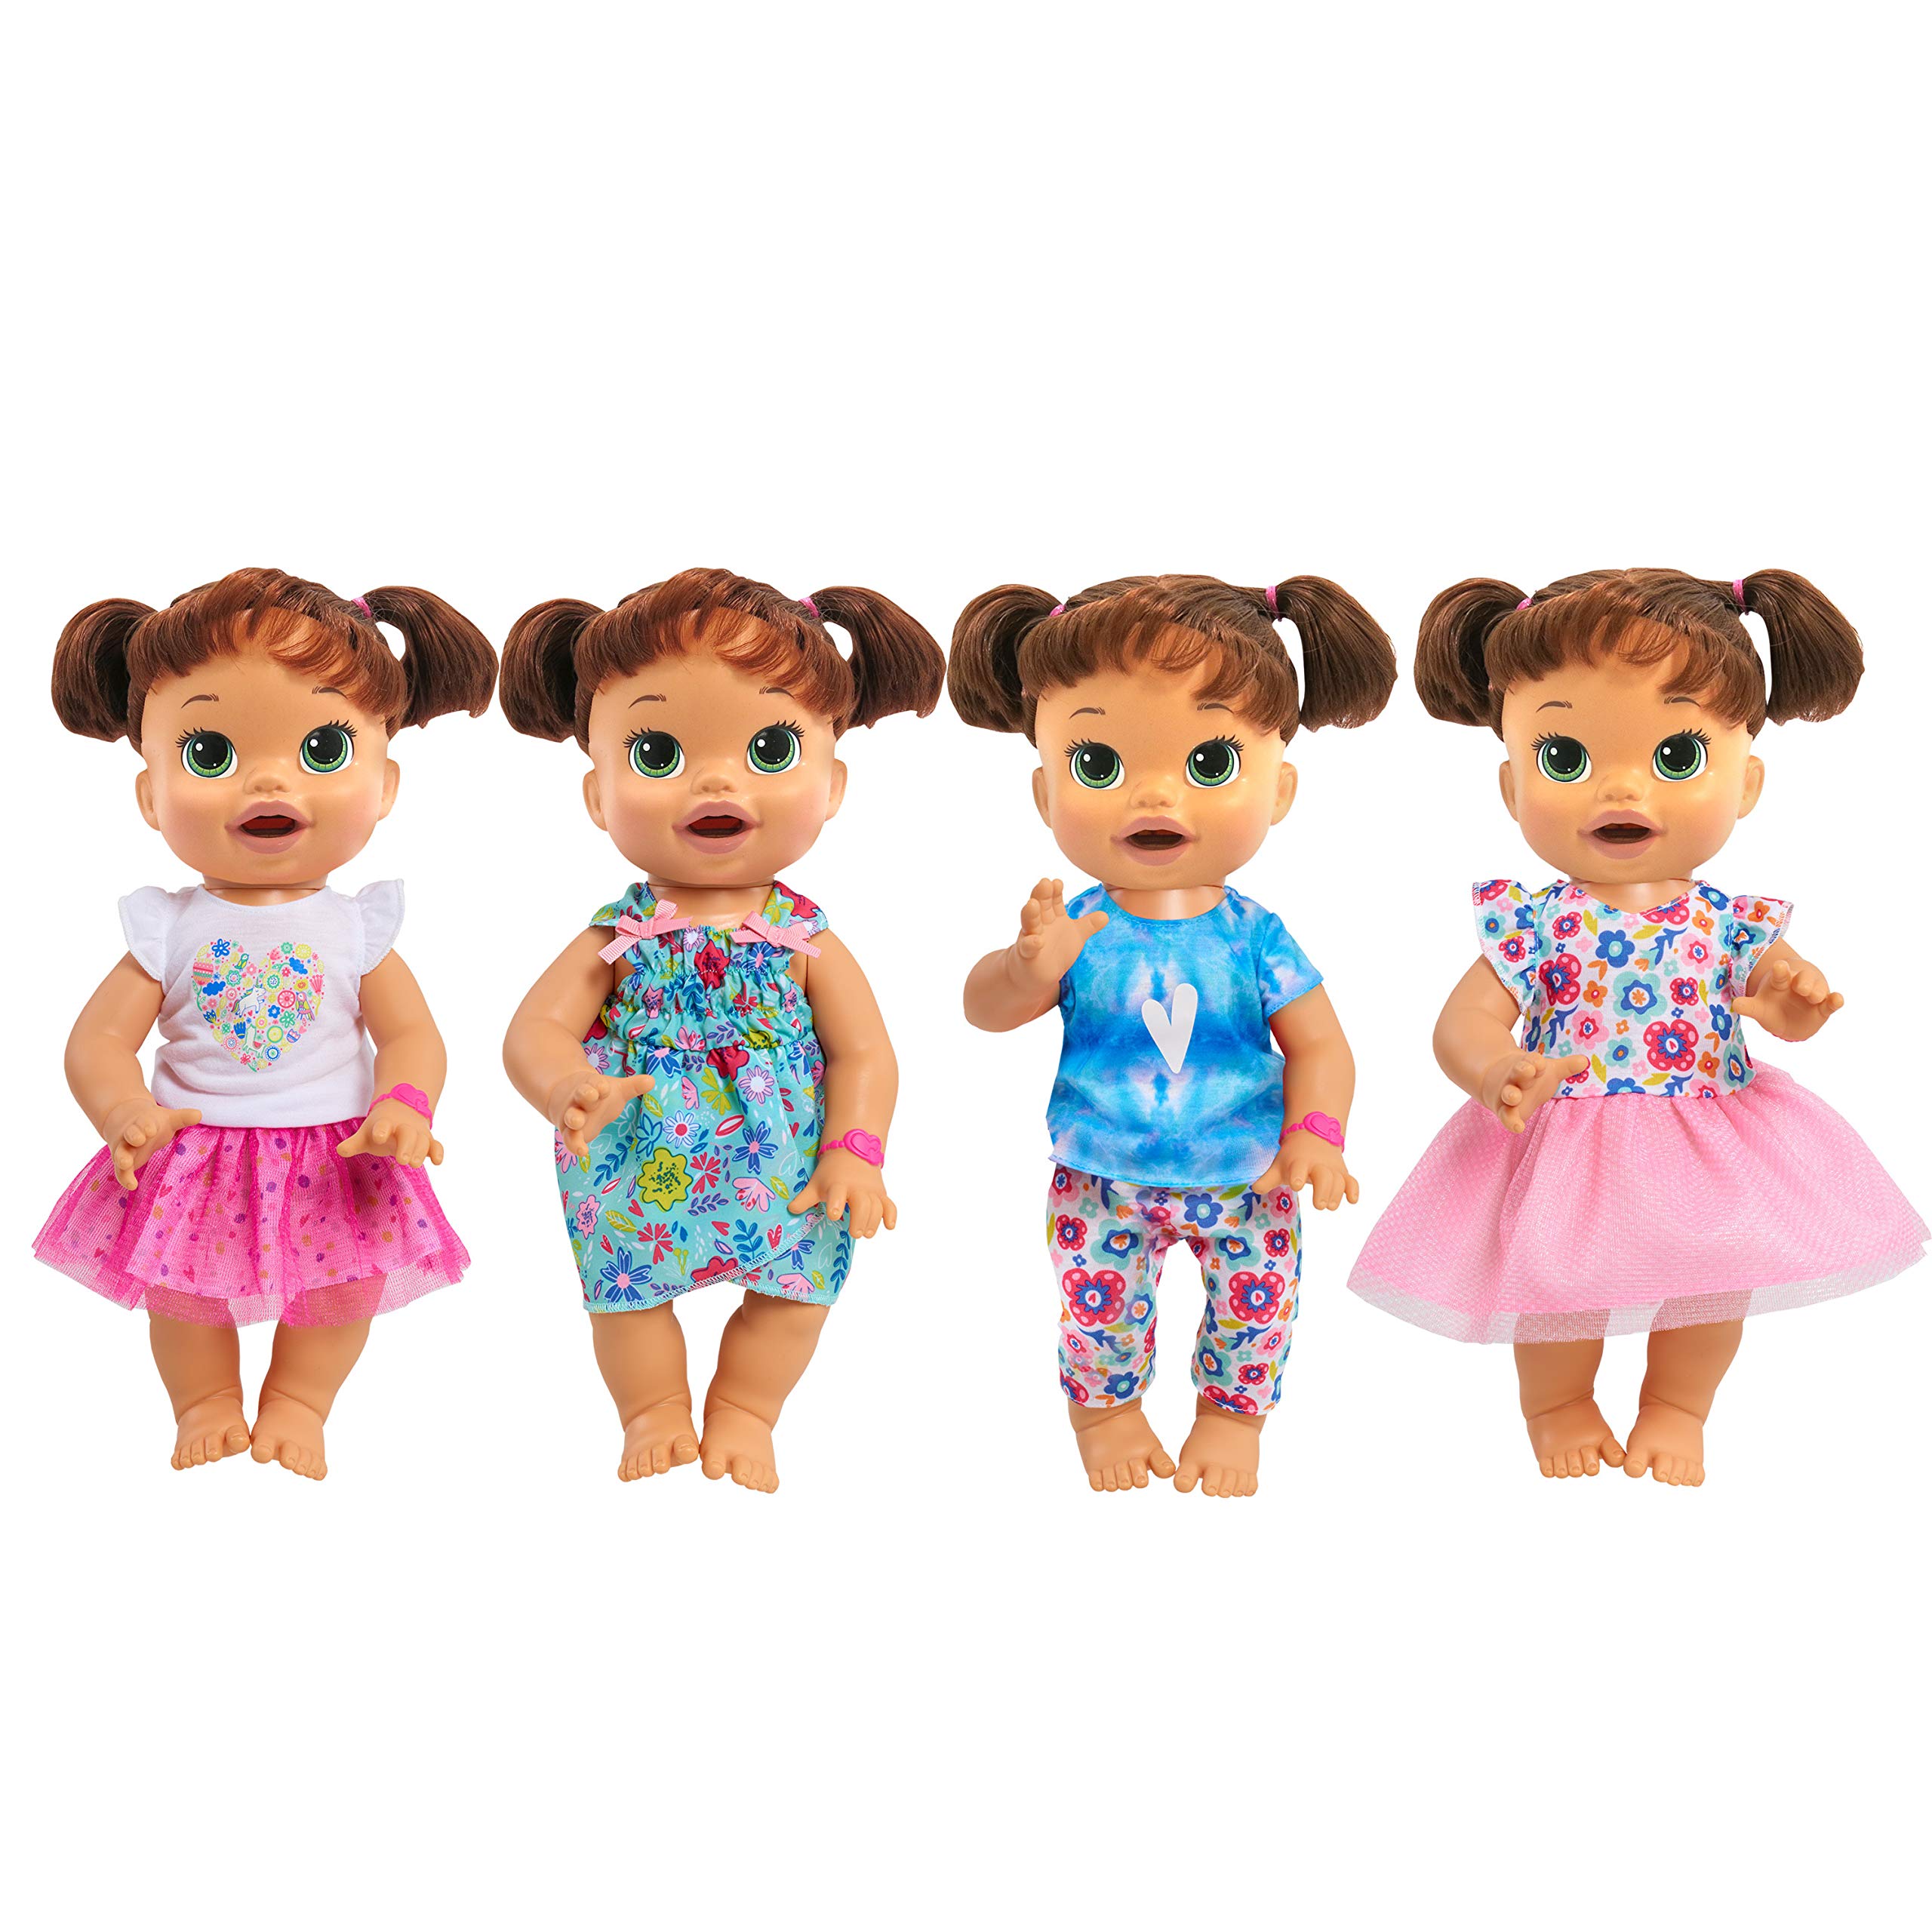 Baby Alive Mix N' Match Outfit Set, Kids Toys for Ages 3 Up, Gifts and Presents by Just Play